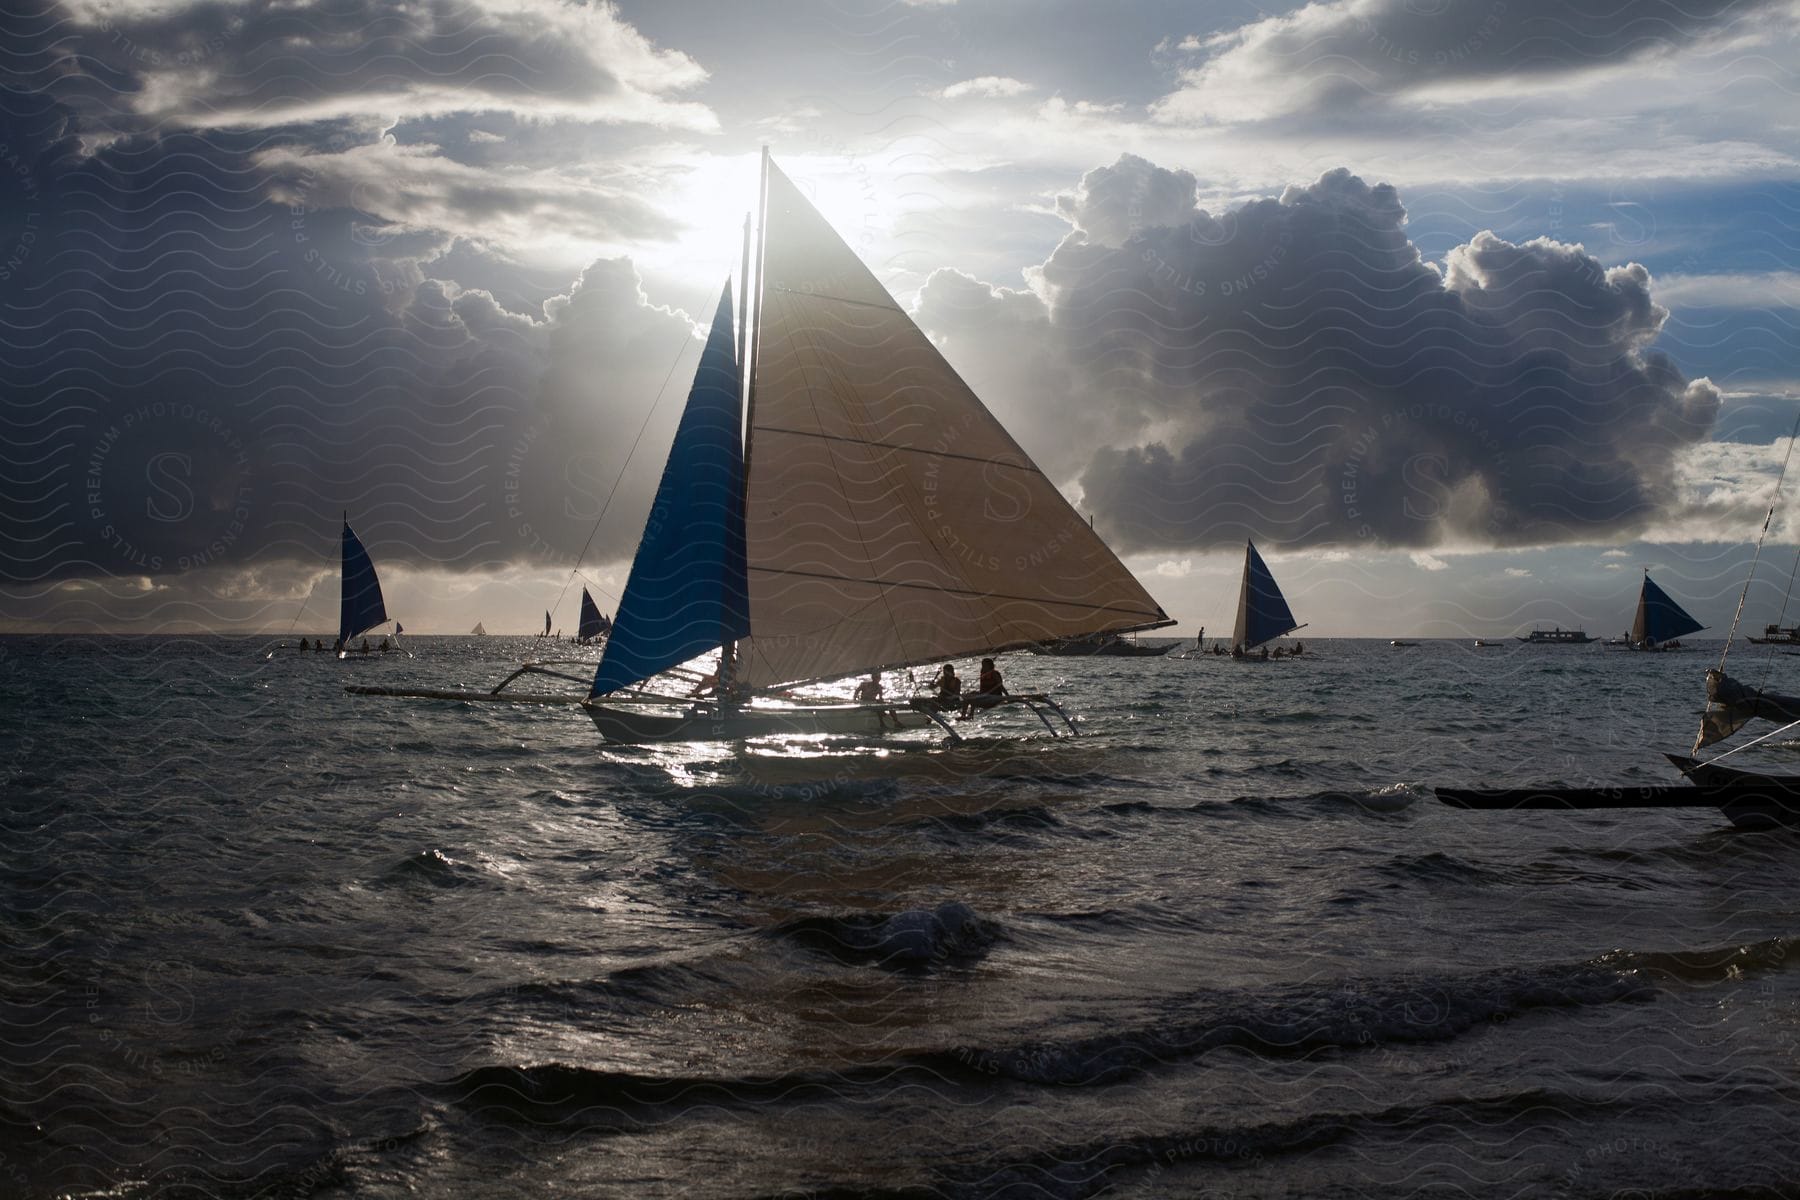 Several sailboats in the ocean on a cloudy day at sunset